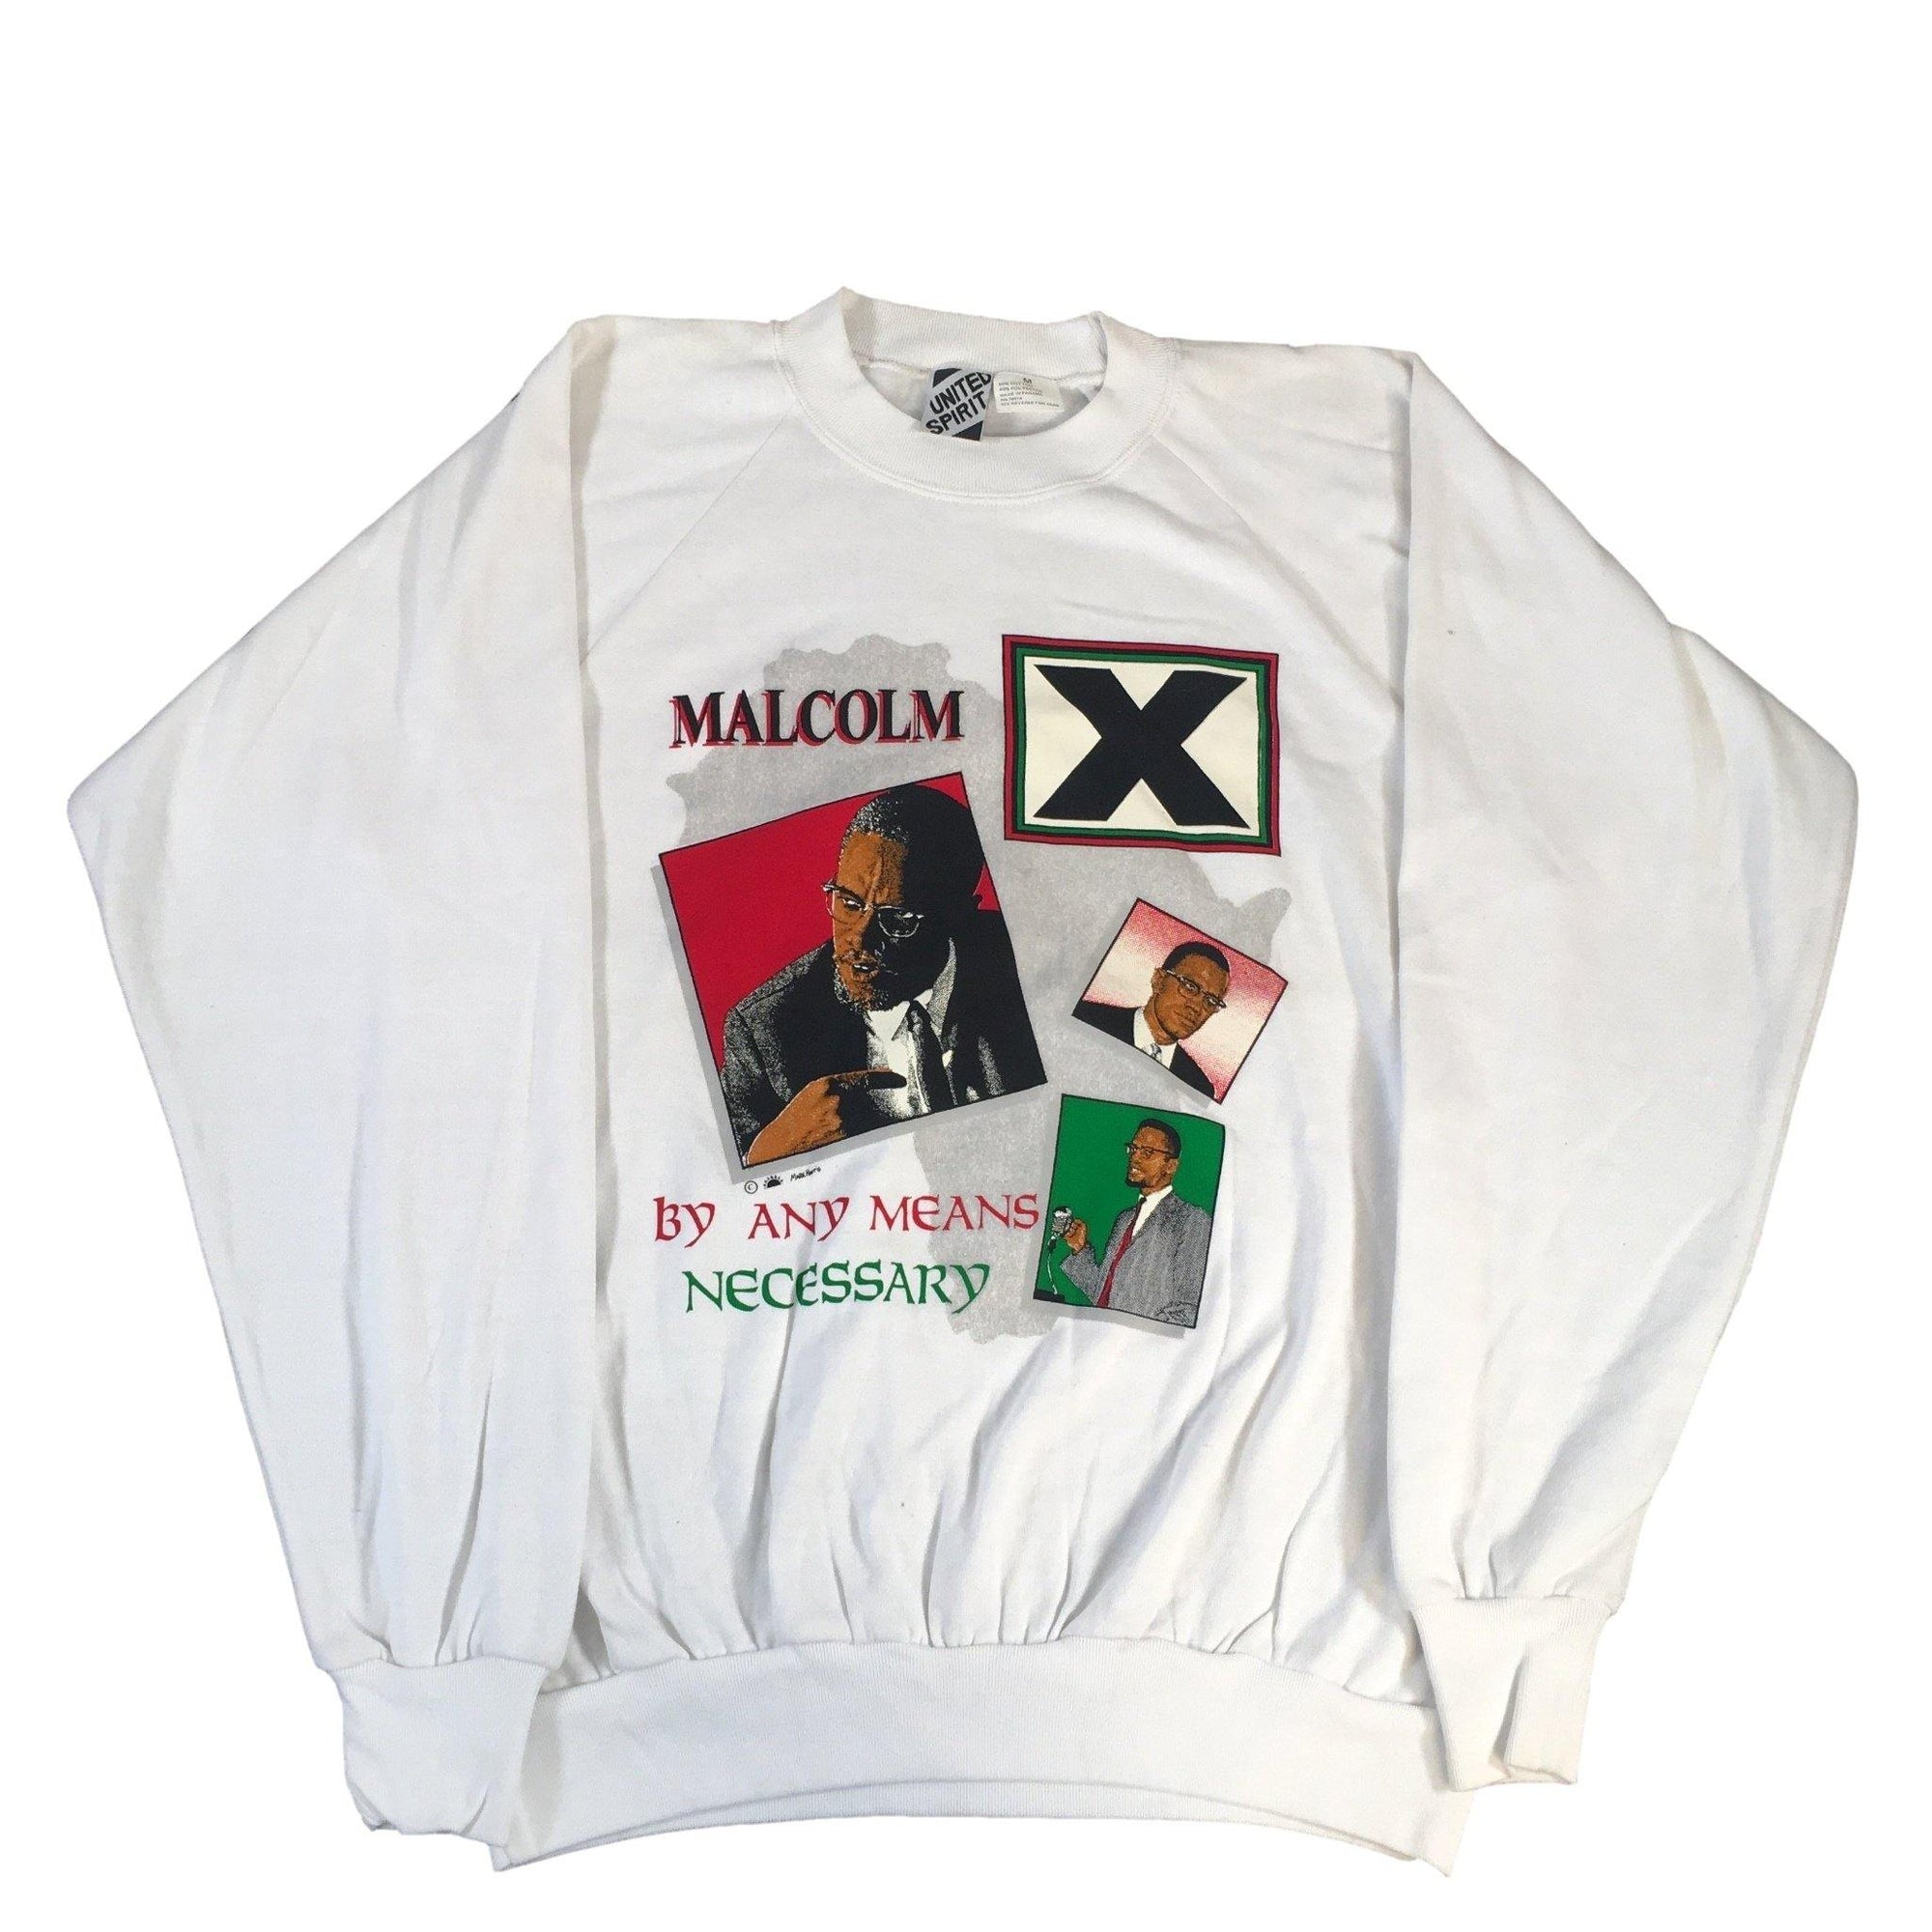 Vintage Malcolm X "By Any Means Necessary" Crewneck - jointcustodydc